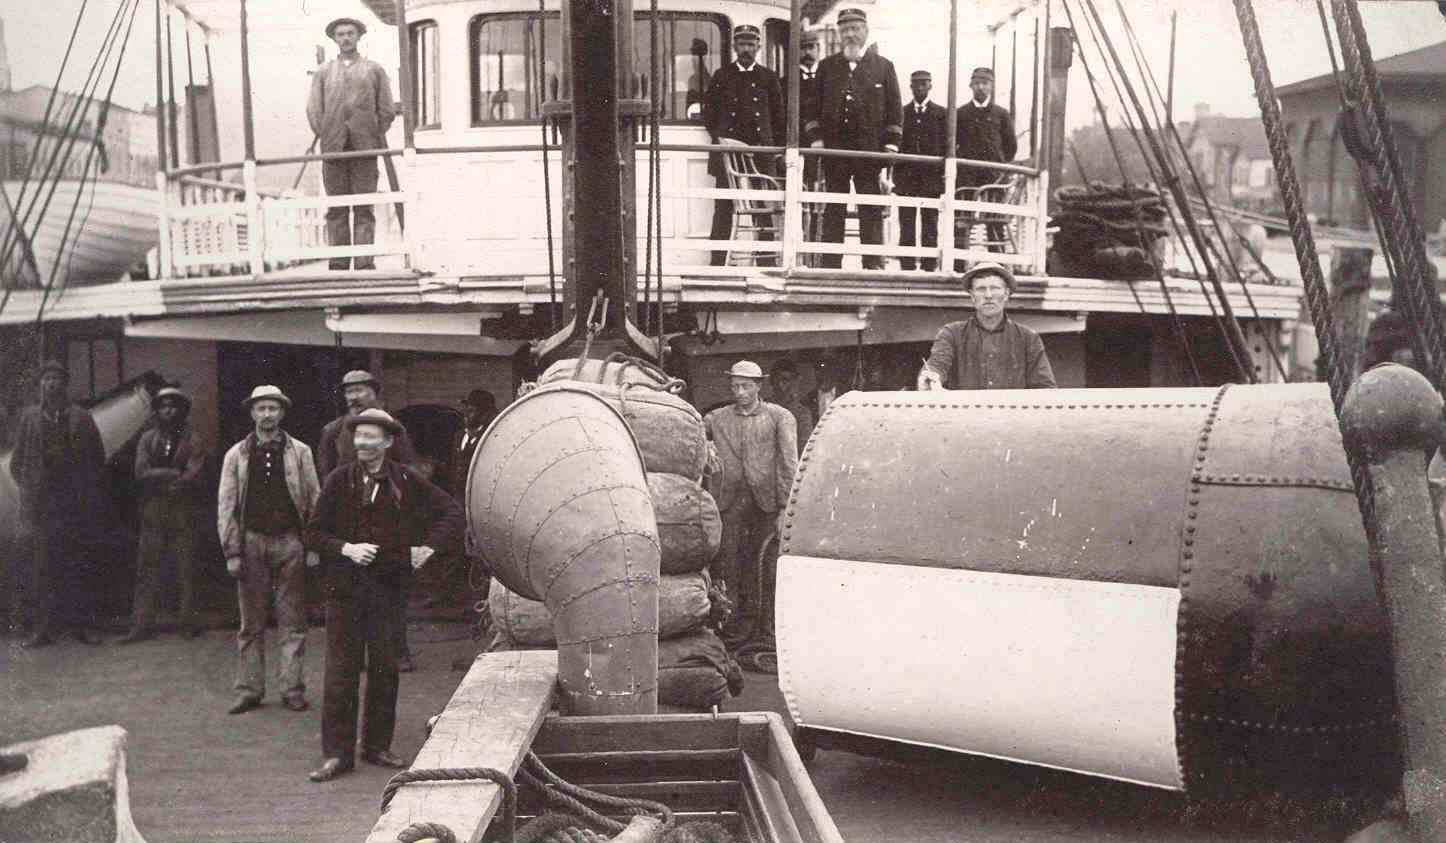 An 1896 photograph of Lighthouse Tender Wisteria’s crew at the old Lighthouse Service’s Charleston buoy yard now Sector Charleston. (Eastern Shipbuilding Group)